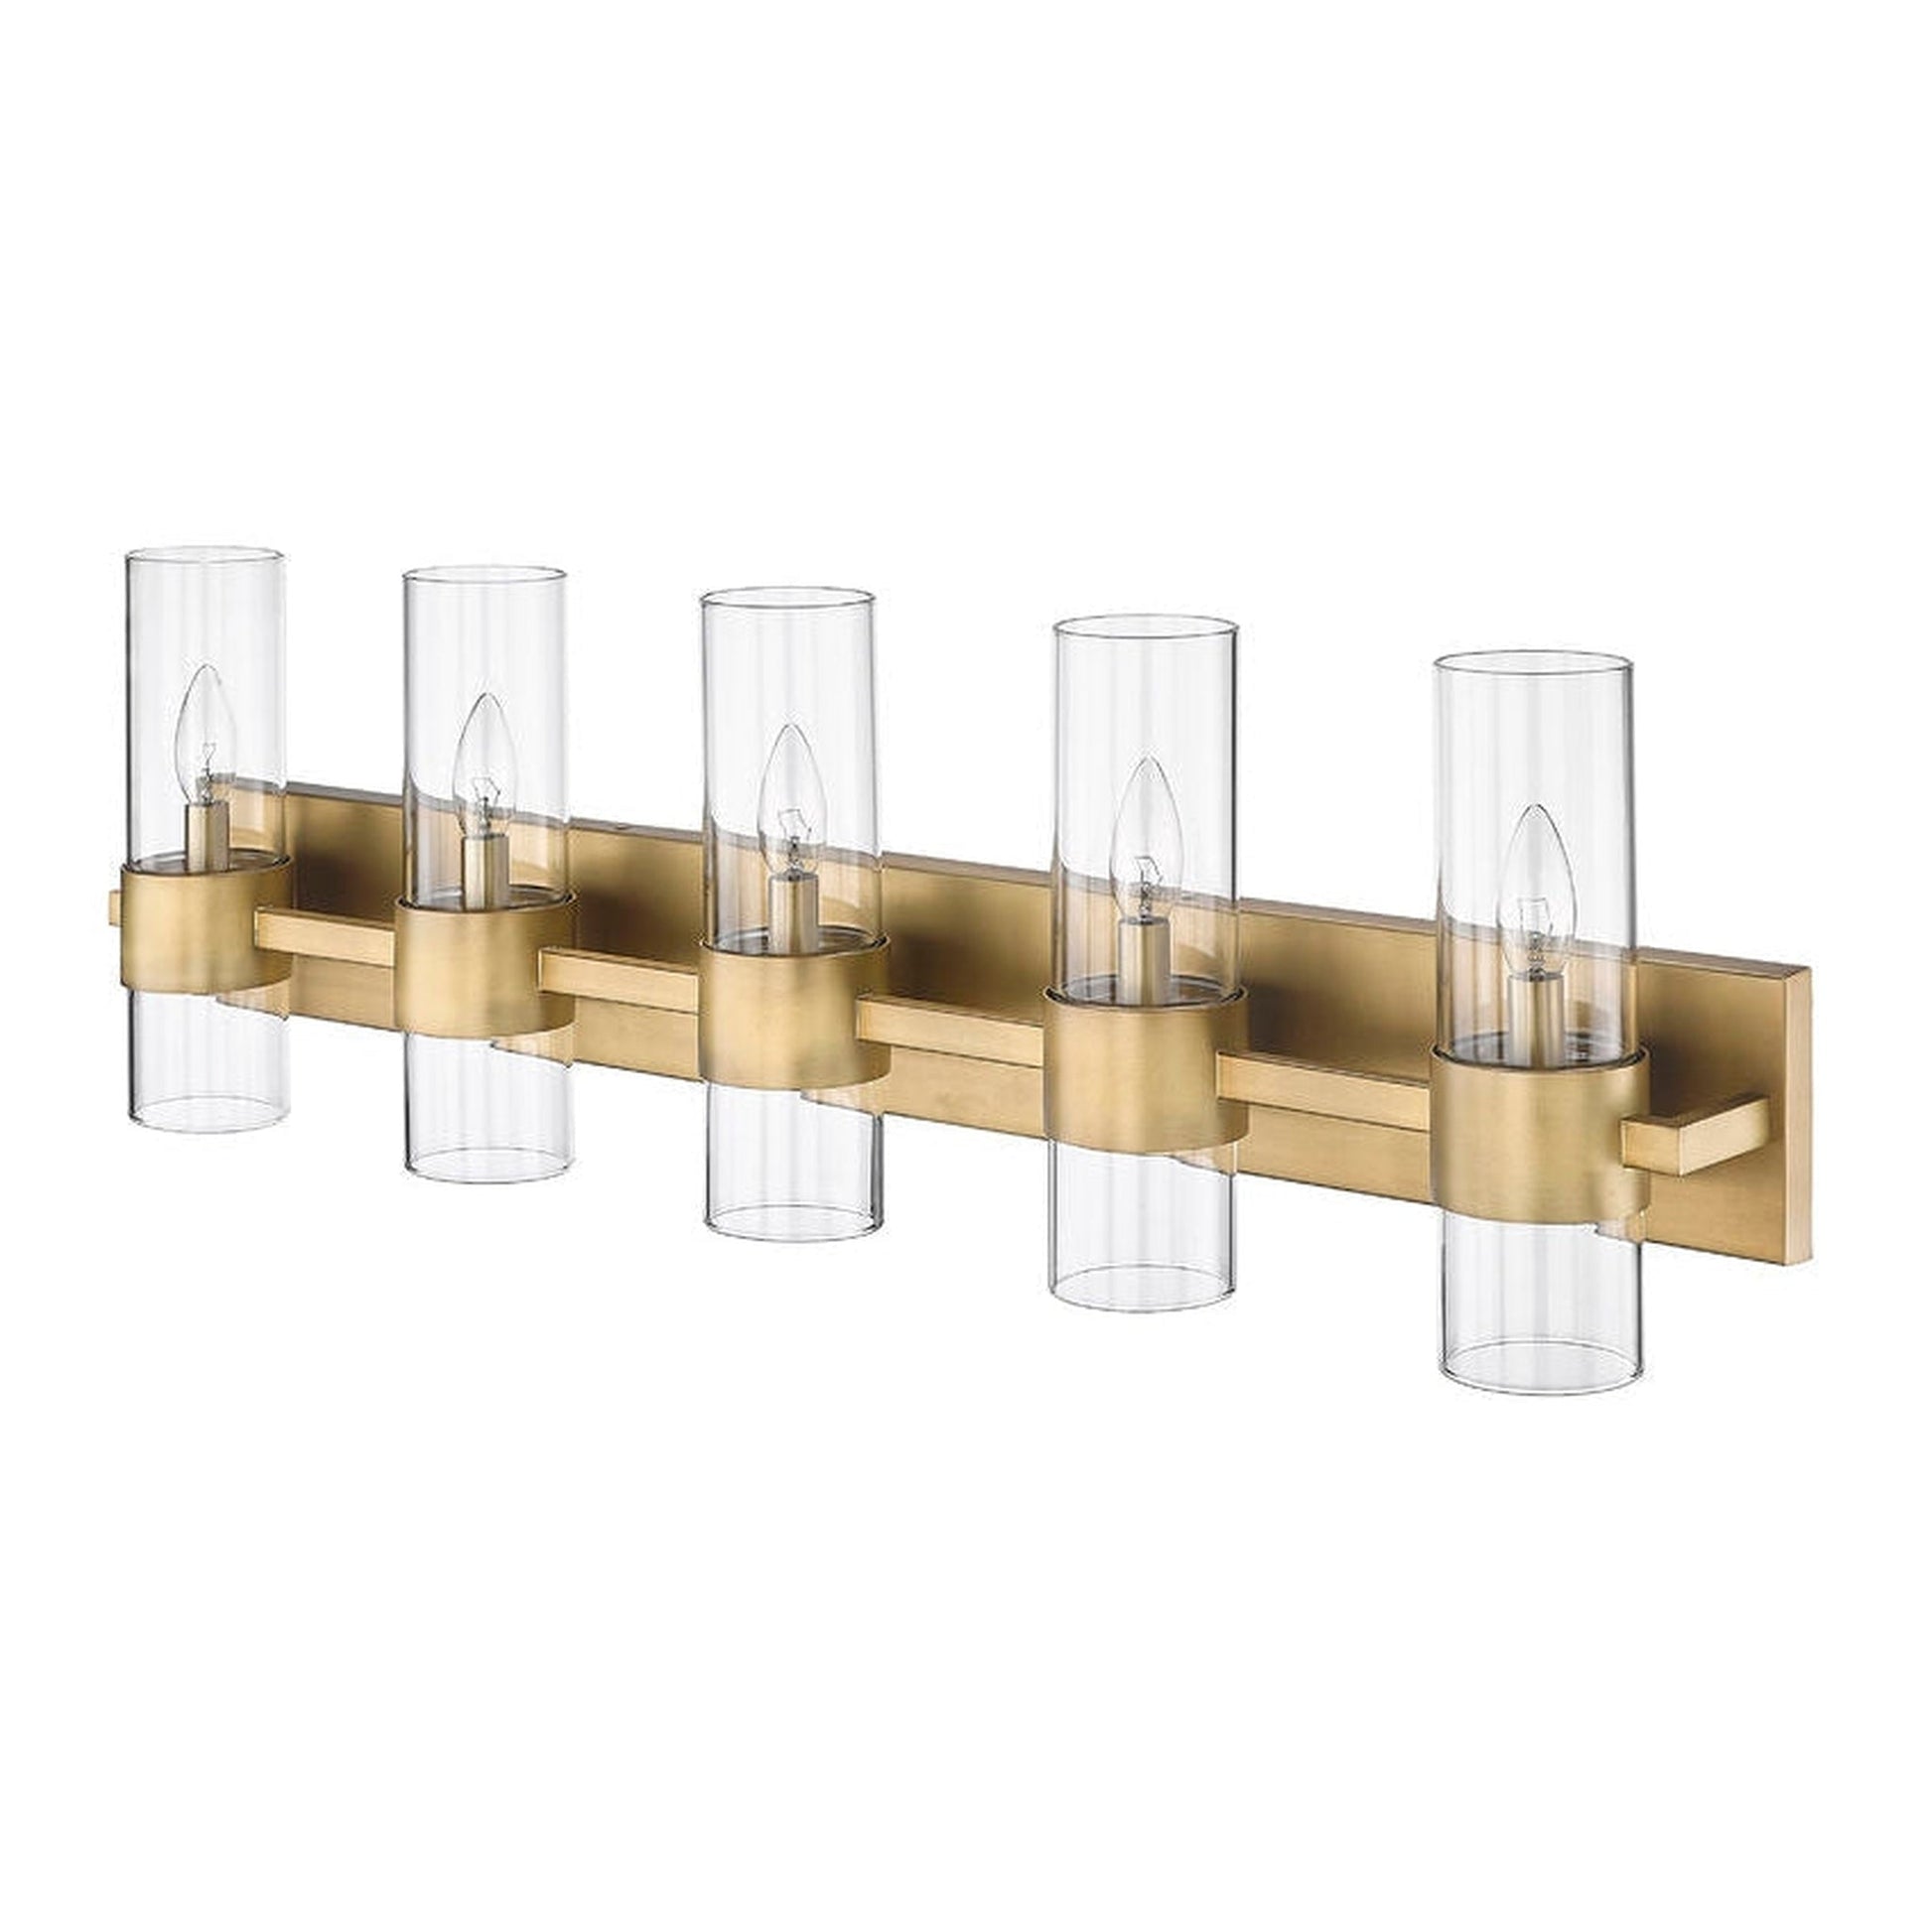 Z-Lite Lawson 38" 5-Light Rubbed Brass Vanity Light With Clear Glass Shade